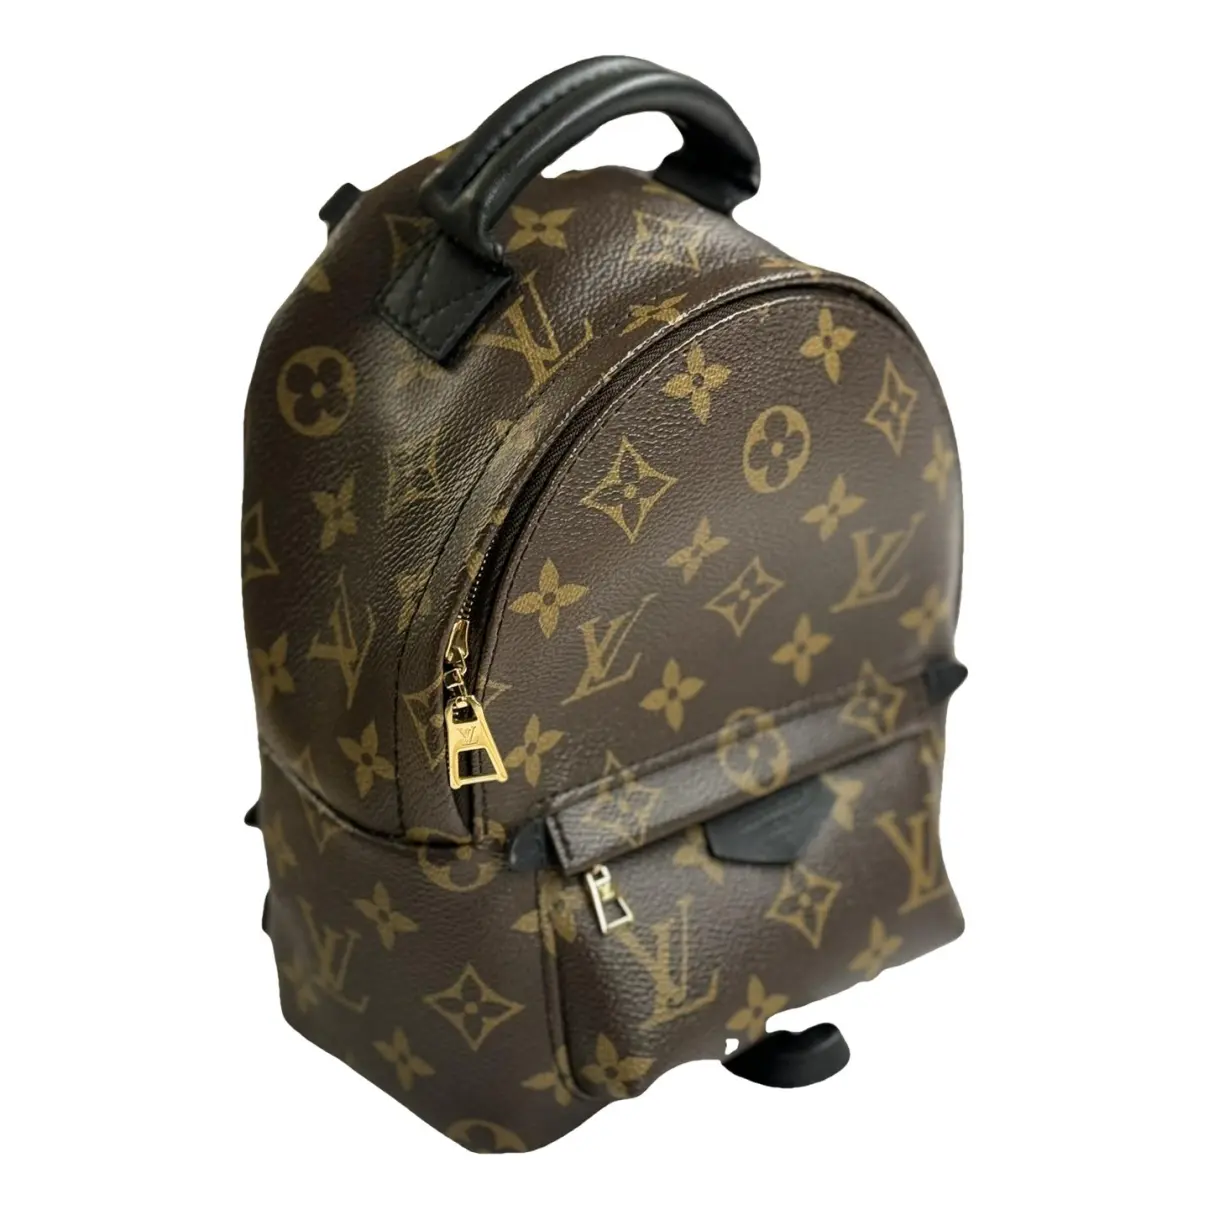 Palm Springs cloth backpack